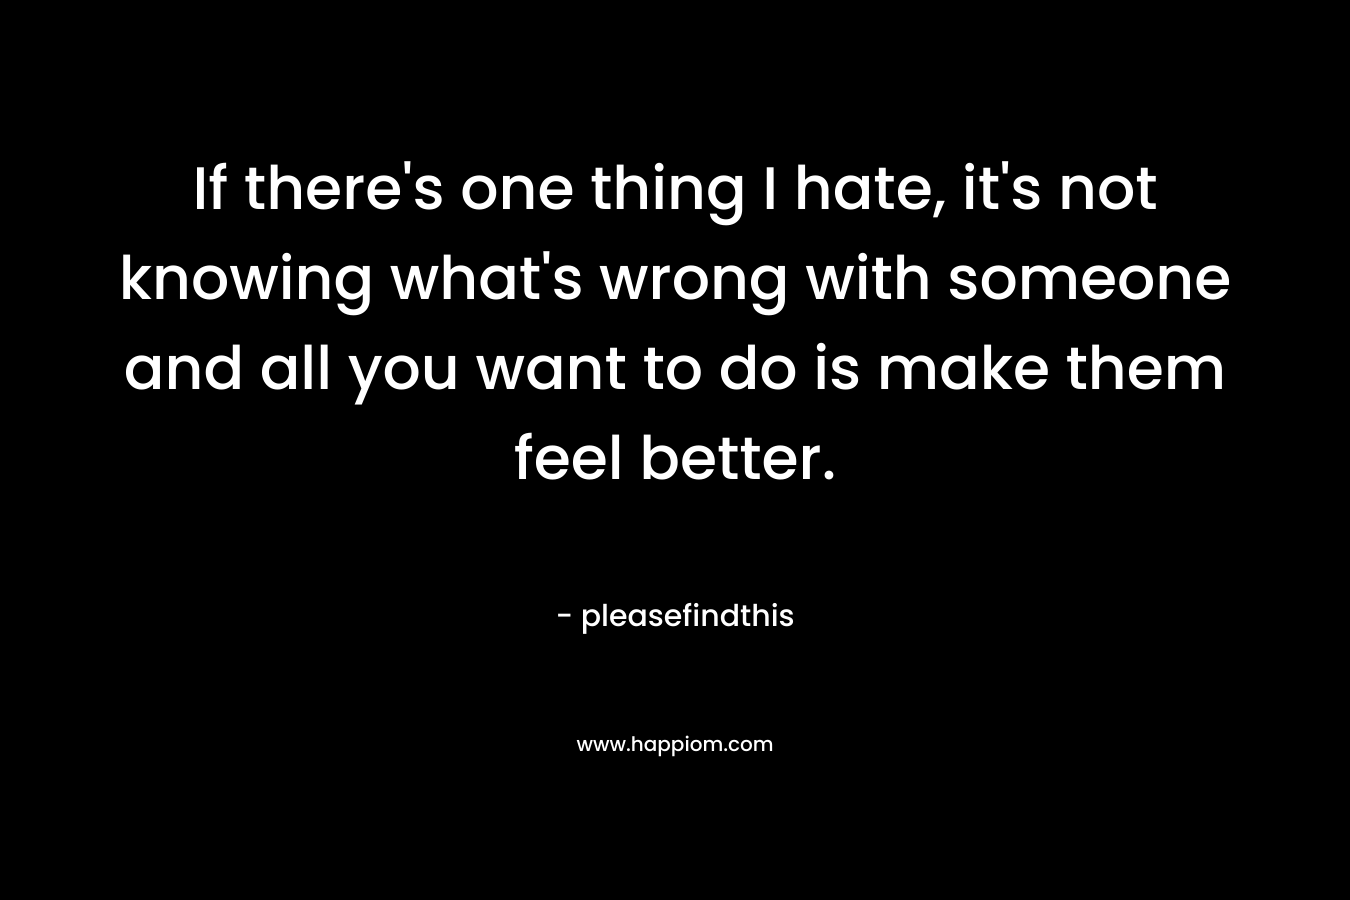 If there’s one thing I hate, it’s not knowing what’s wrong with someone and all you want to do is make them feel better. – pleasefindthis